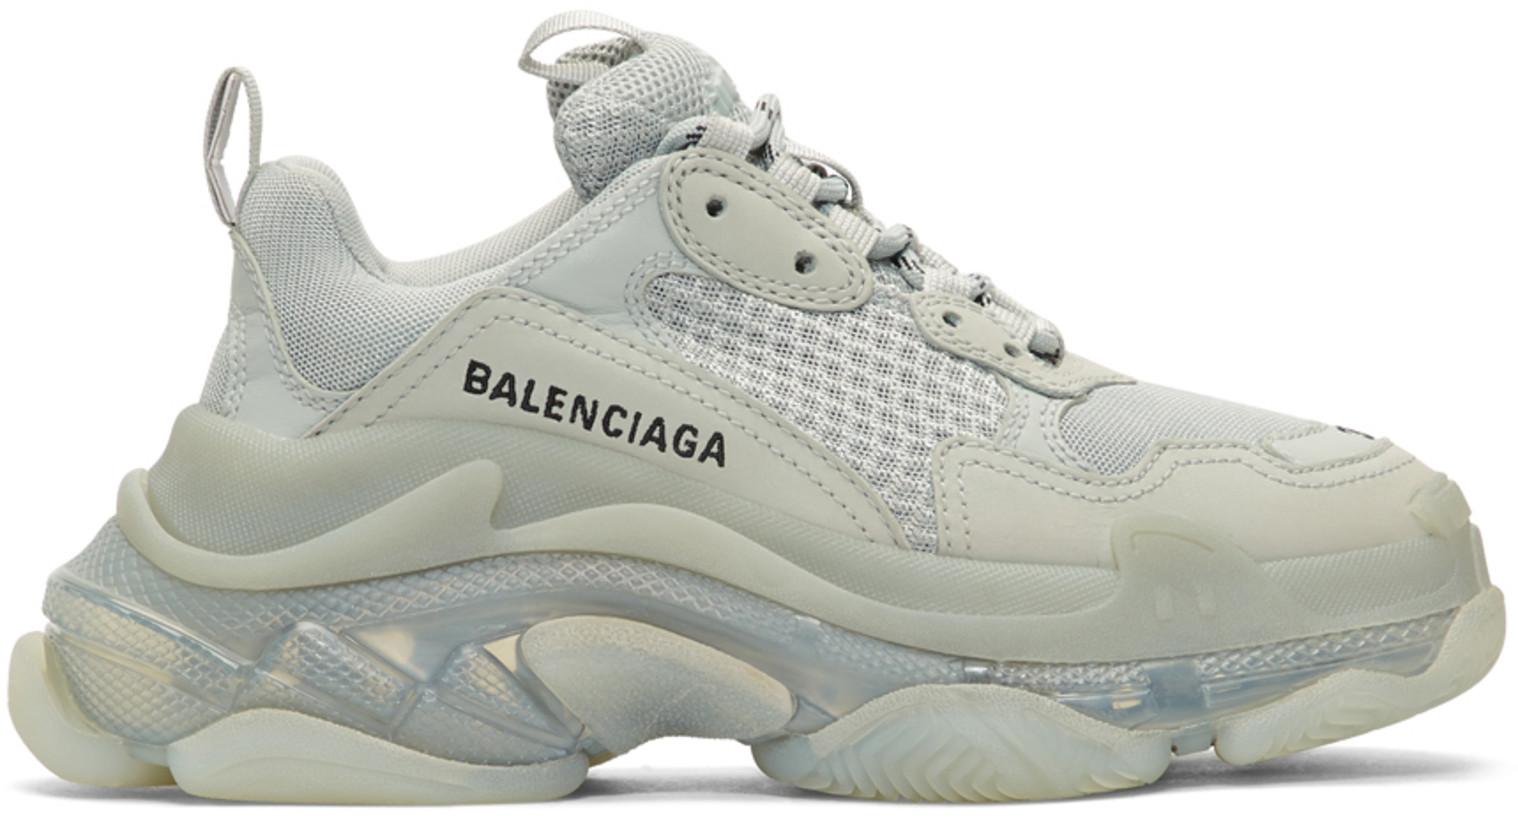 Balenciaga Synthetic Triple S Low-top Sneakers in Grey (Gray) - Save 30